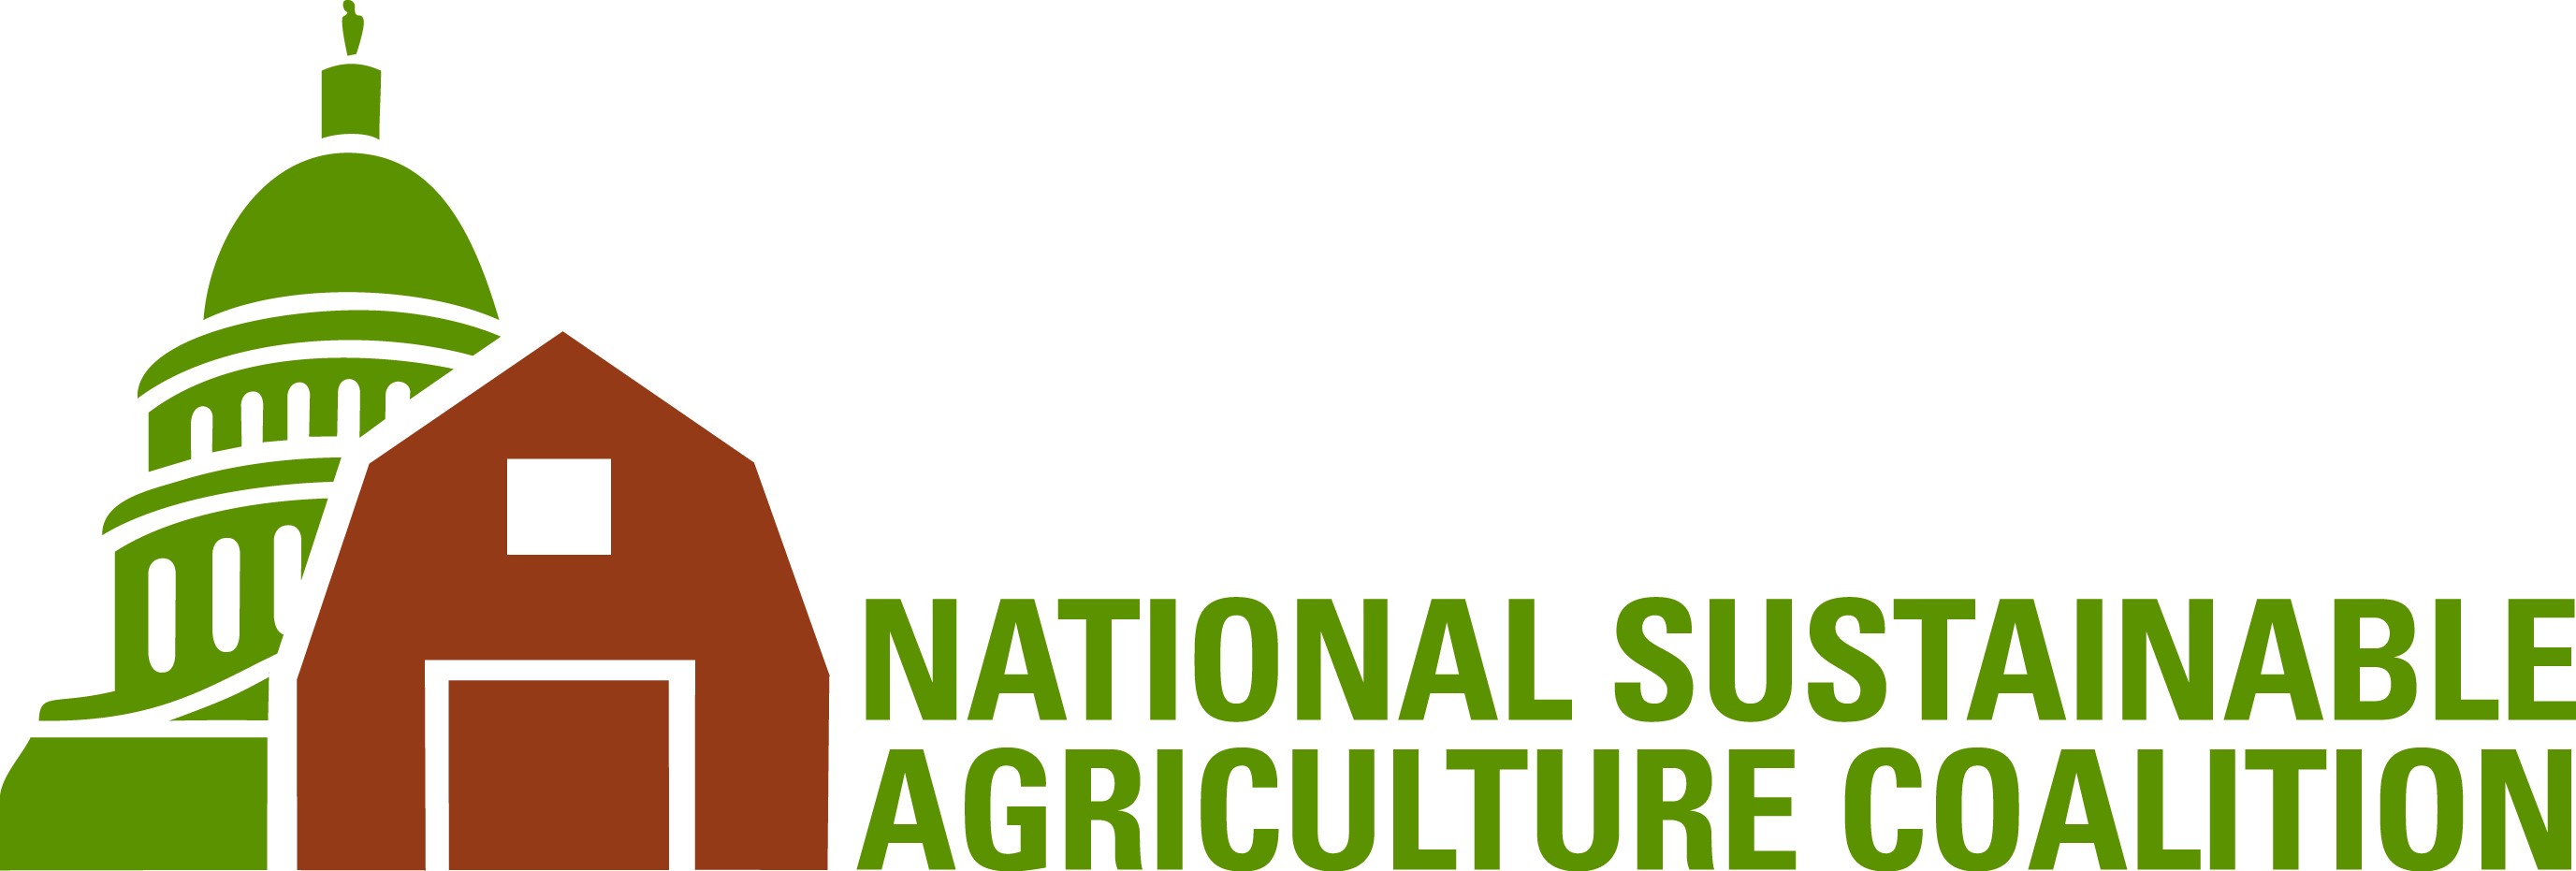 Sustainable Agriculture Coalition 